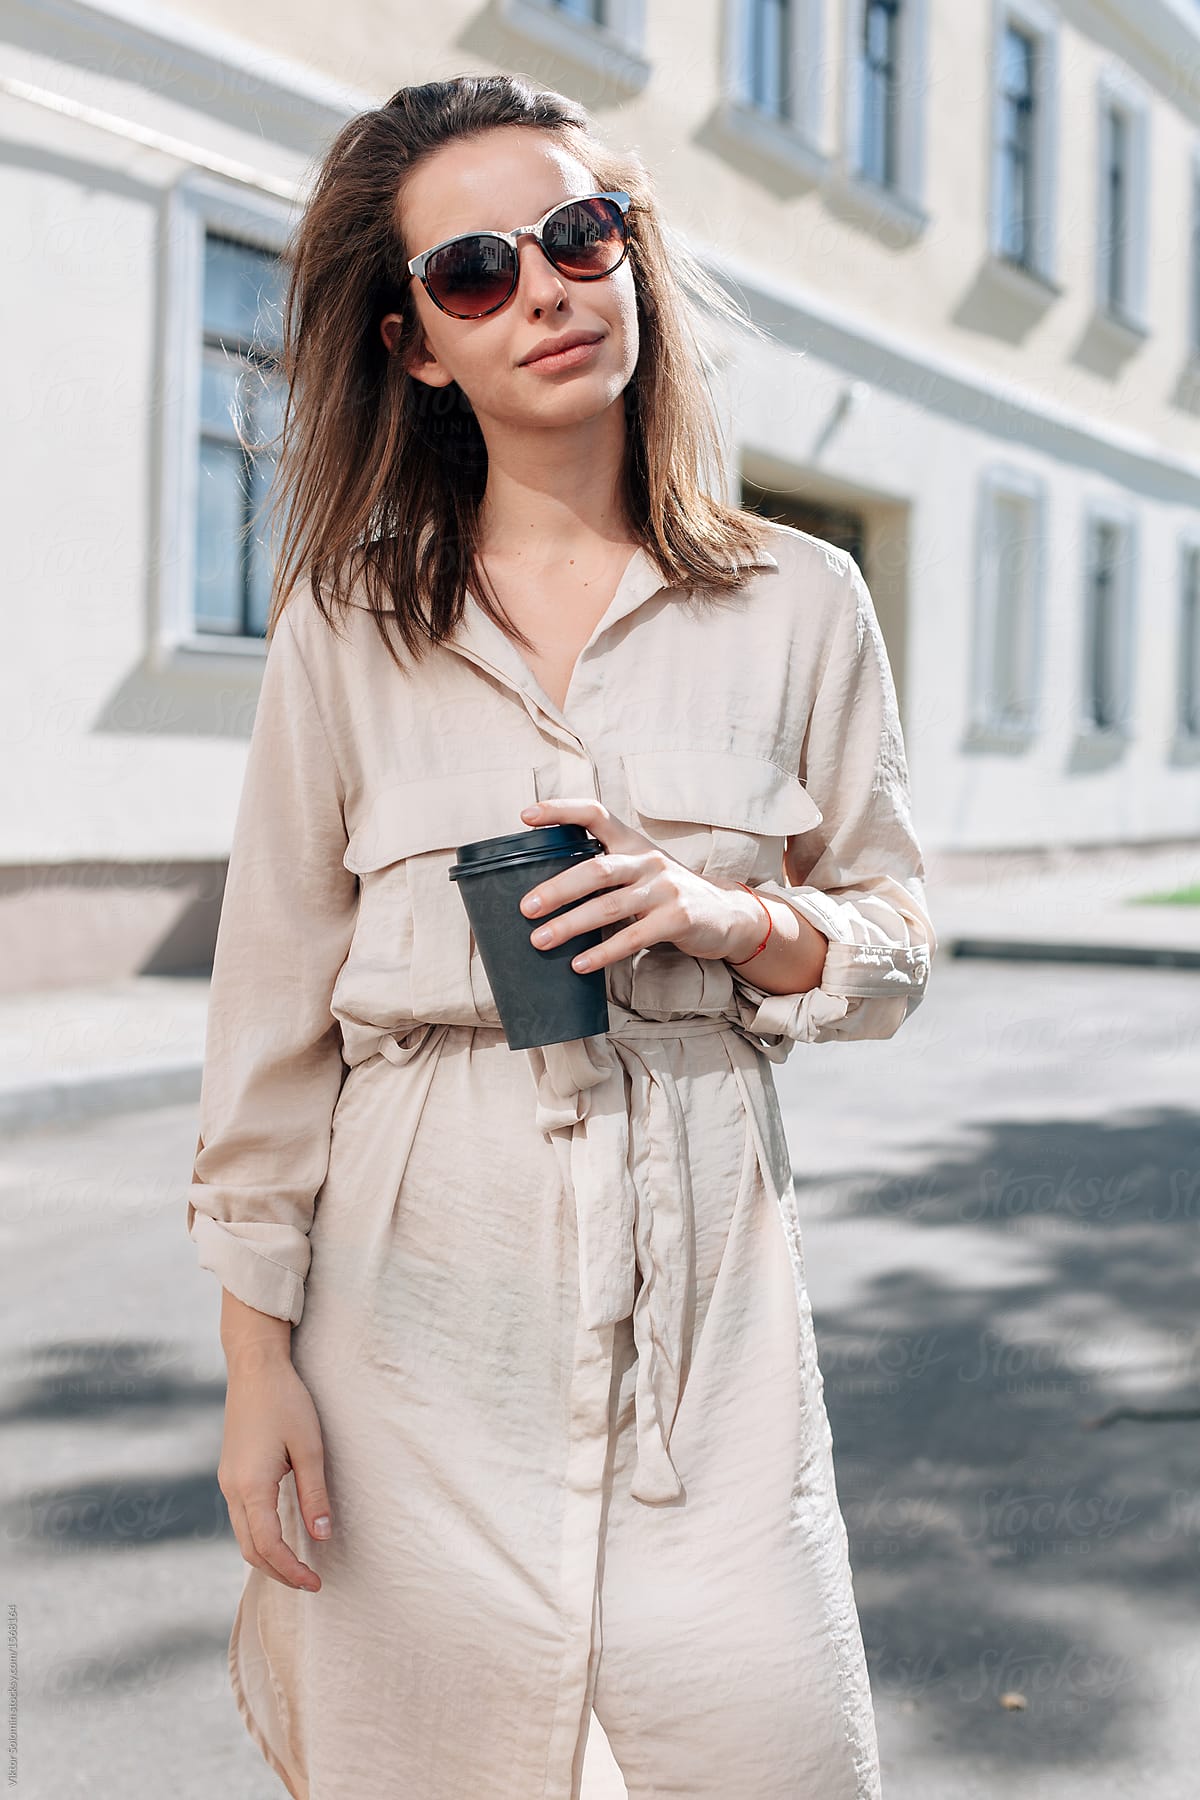 Closeup portrait of pretty sensual woman having cup of coffee in hands standing on the street